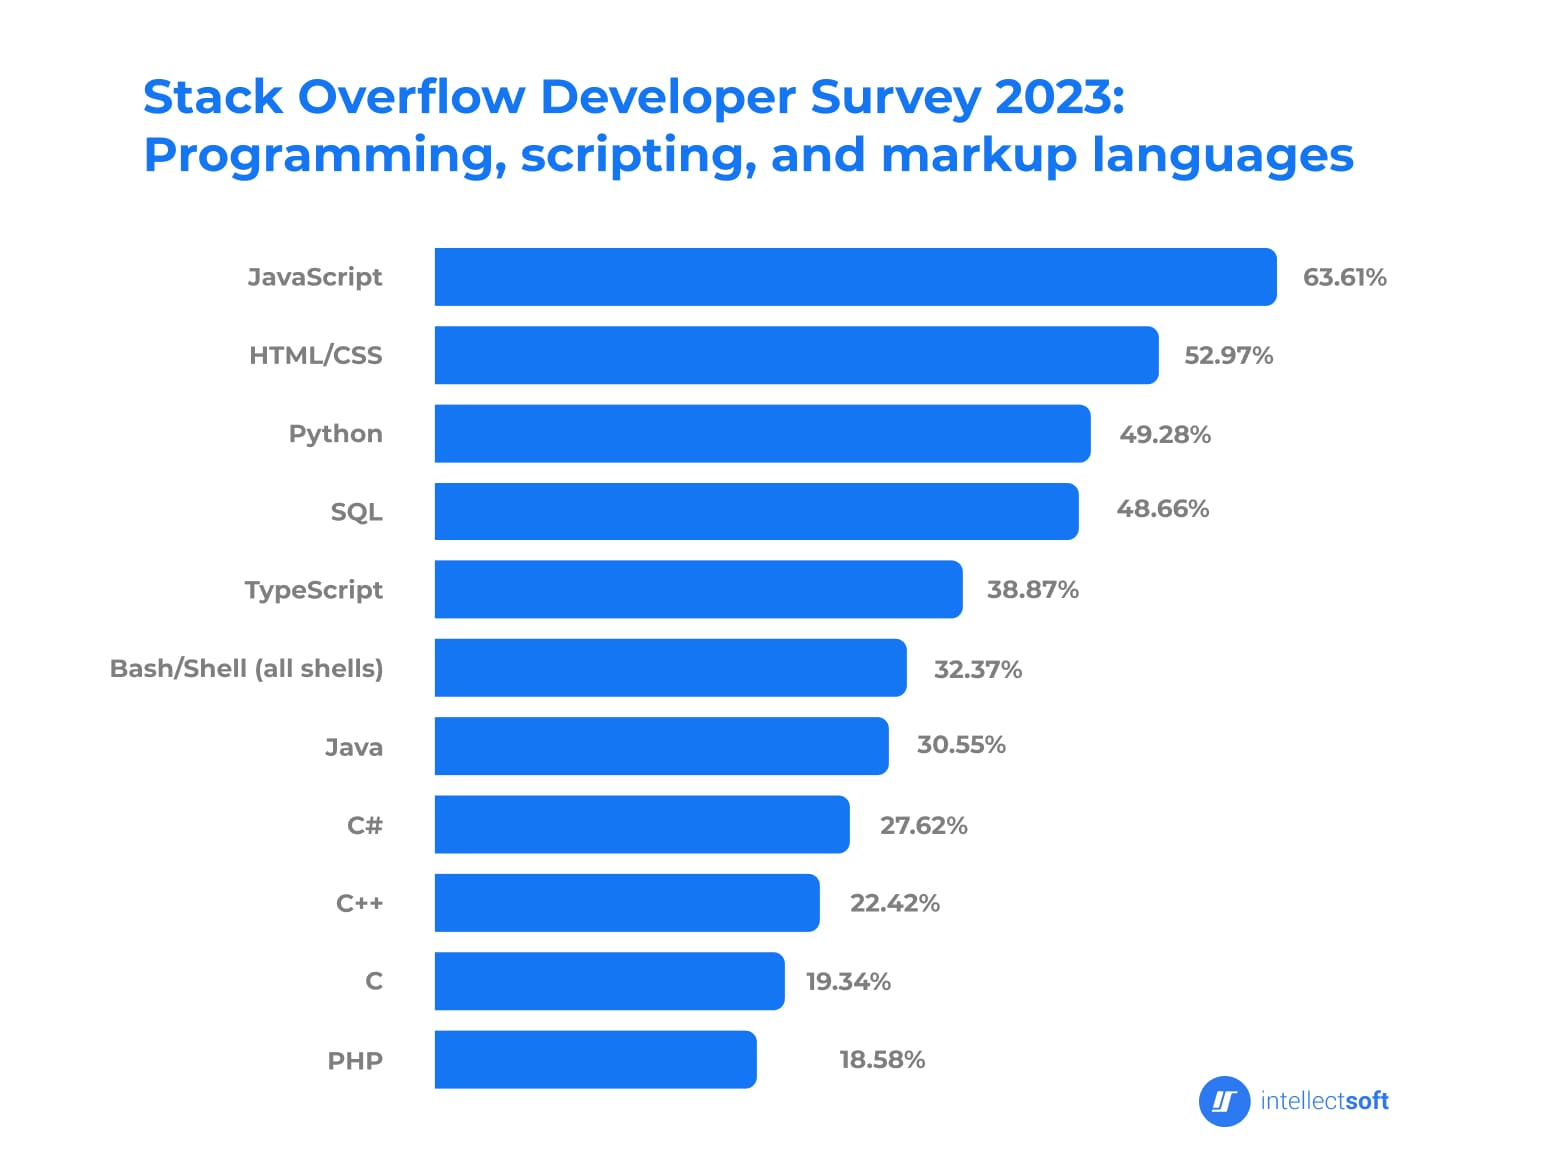 Infographic of programming languages, scripts, and markup based on the Stack Overflow developer survey in 2023